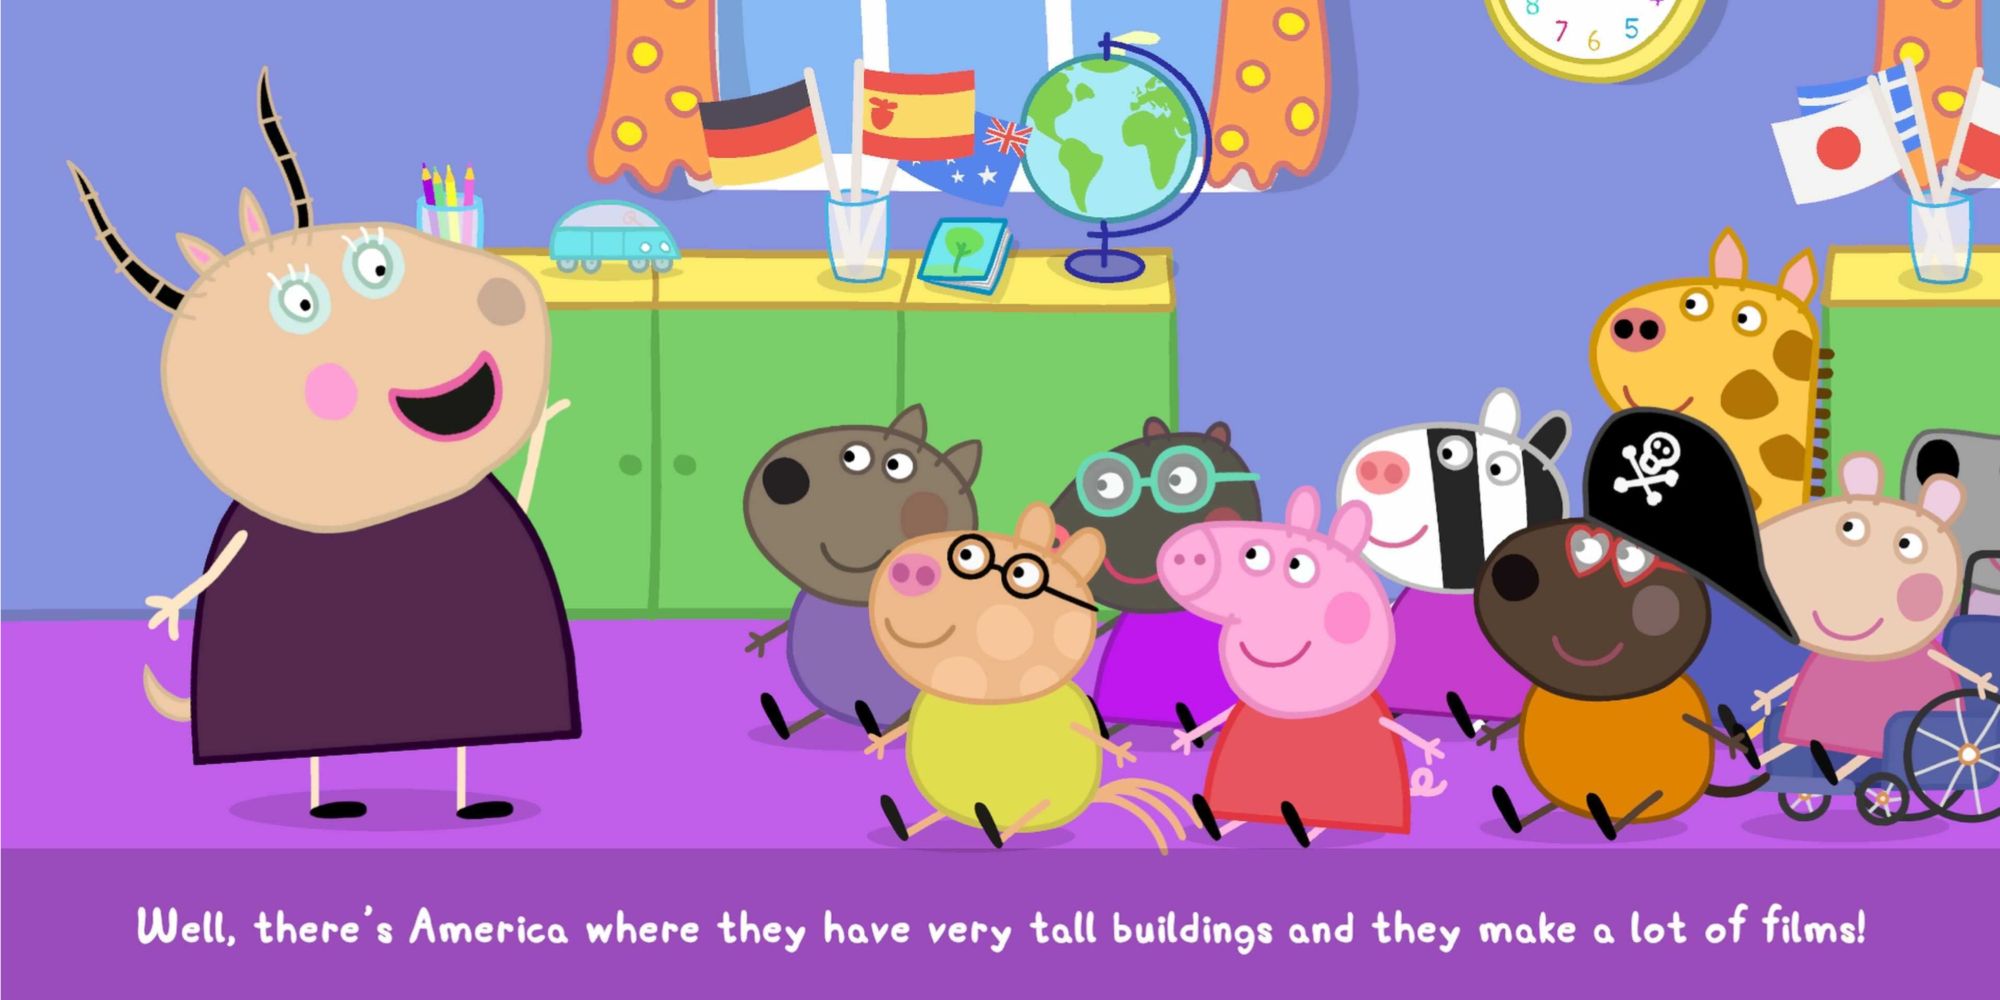 Peppa Pig and other characters in the classroom